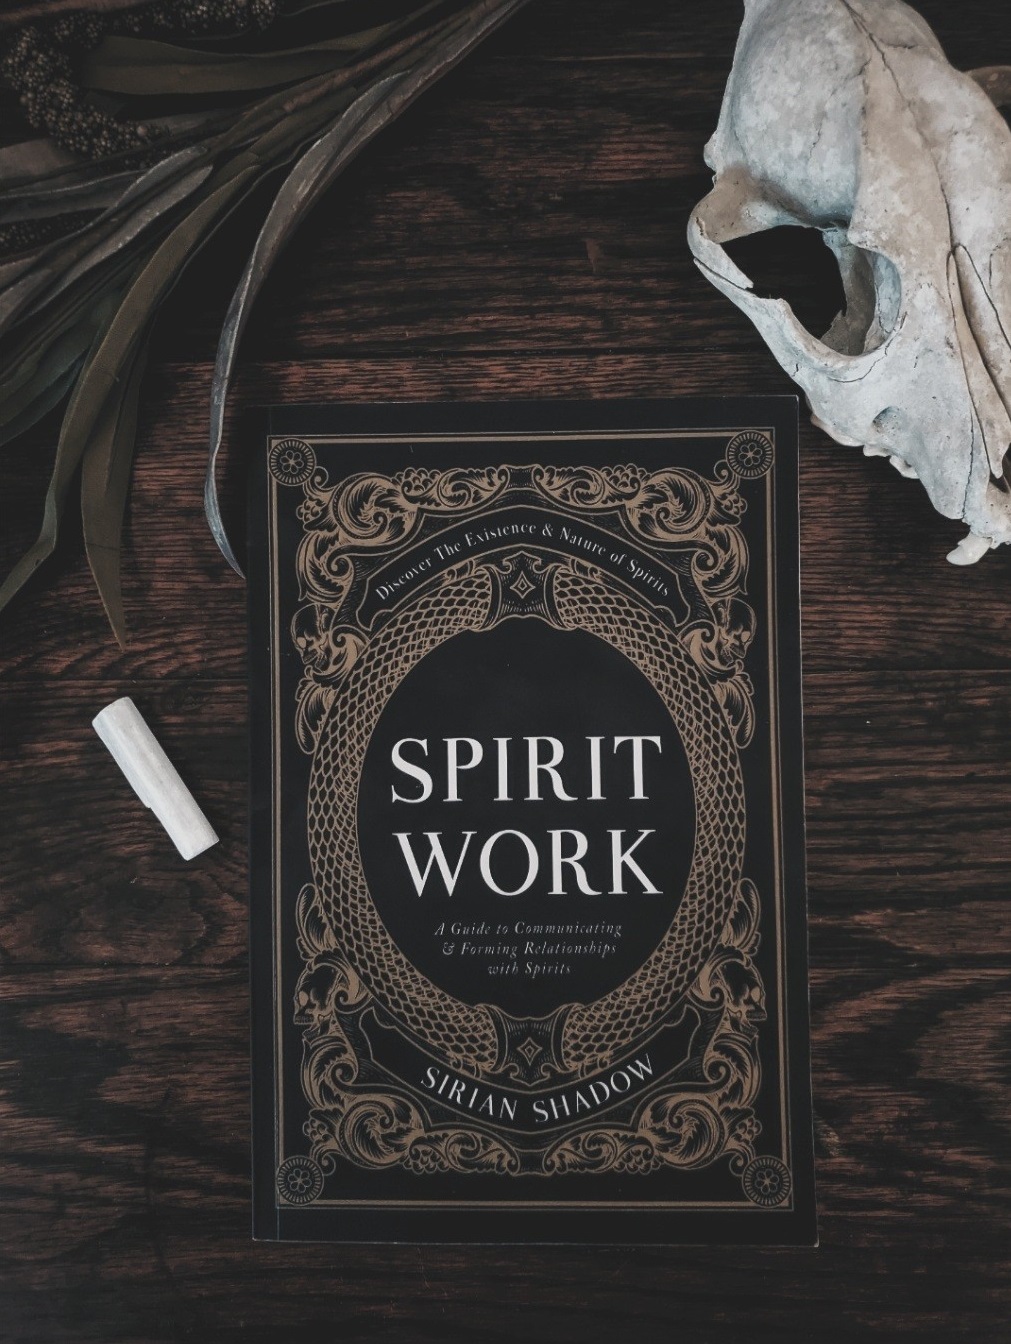 spirit work, spirit communication, spirits, divination, book review, witch, witchcraft, wicca, wiccan, pagan, neopagan, witchy reads, witch book